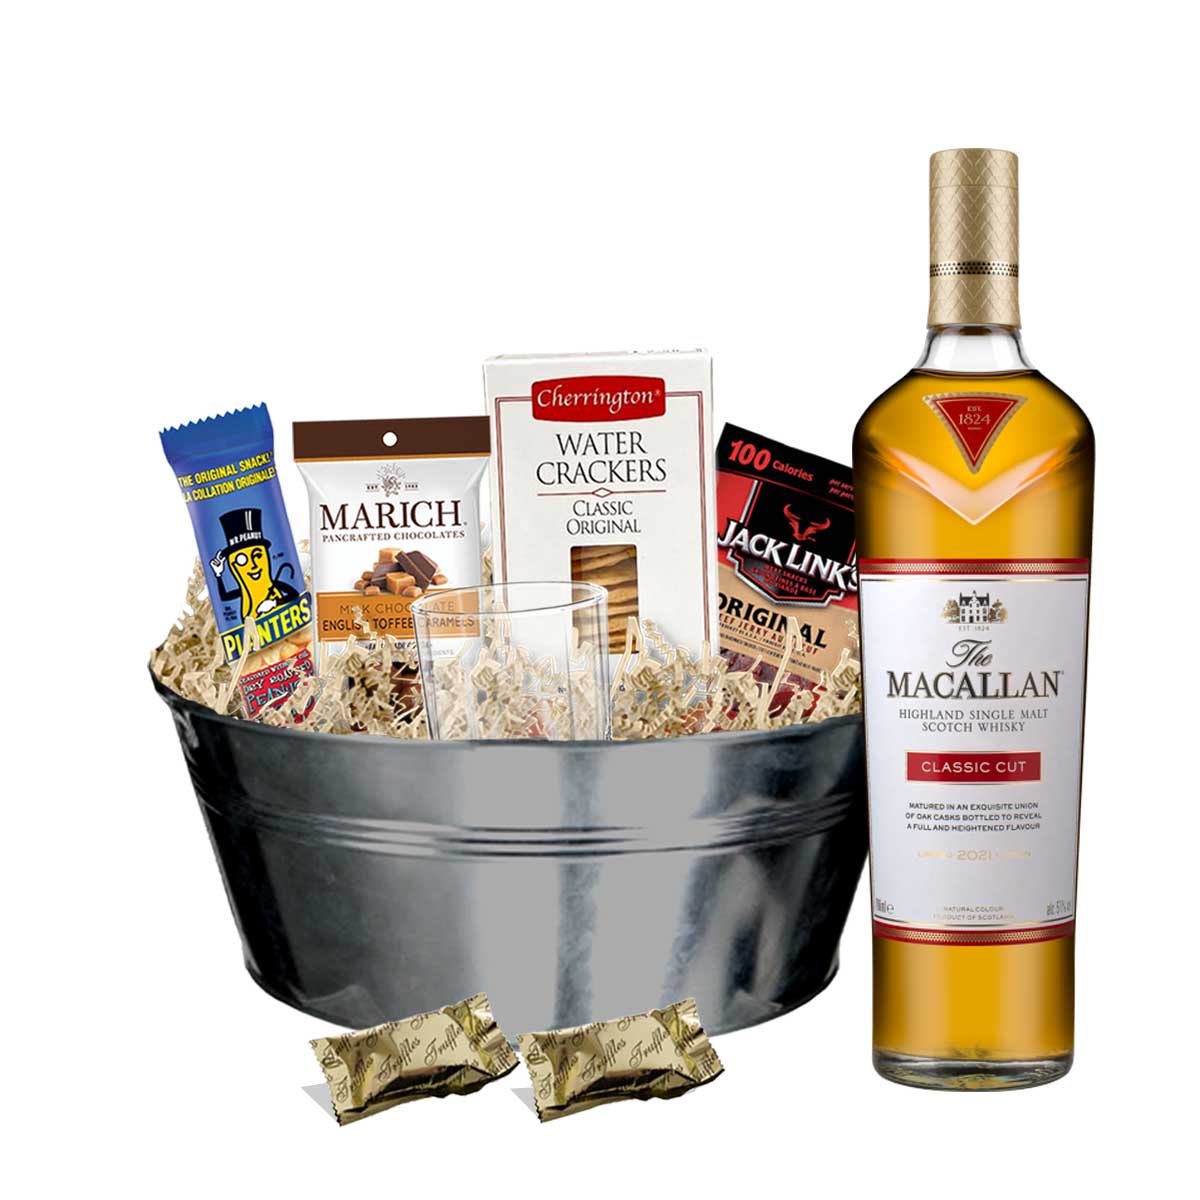 TAG Liquor Stores BC - Macallan Classic Cut Scotch Whisky 750ml Gift Basket